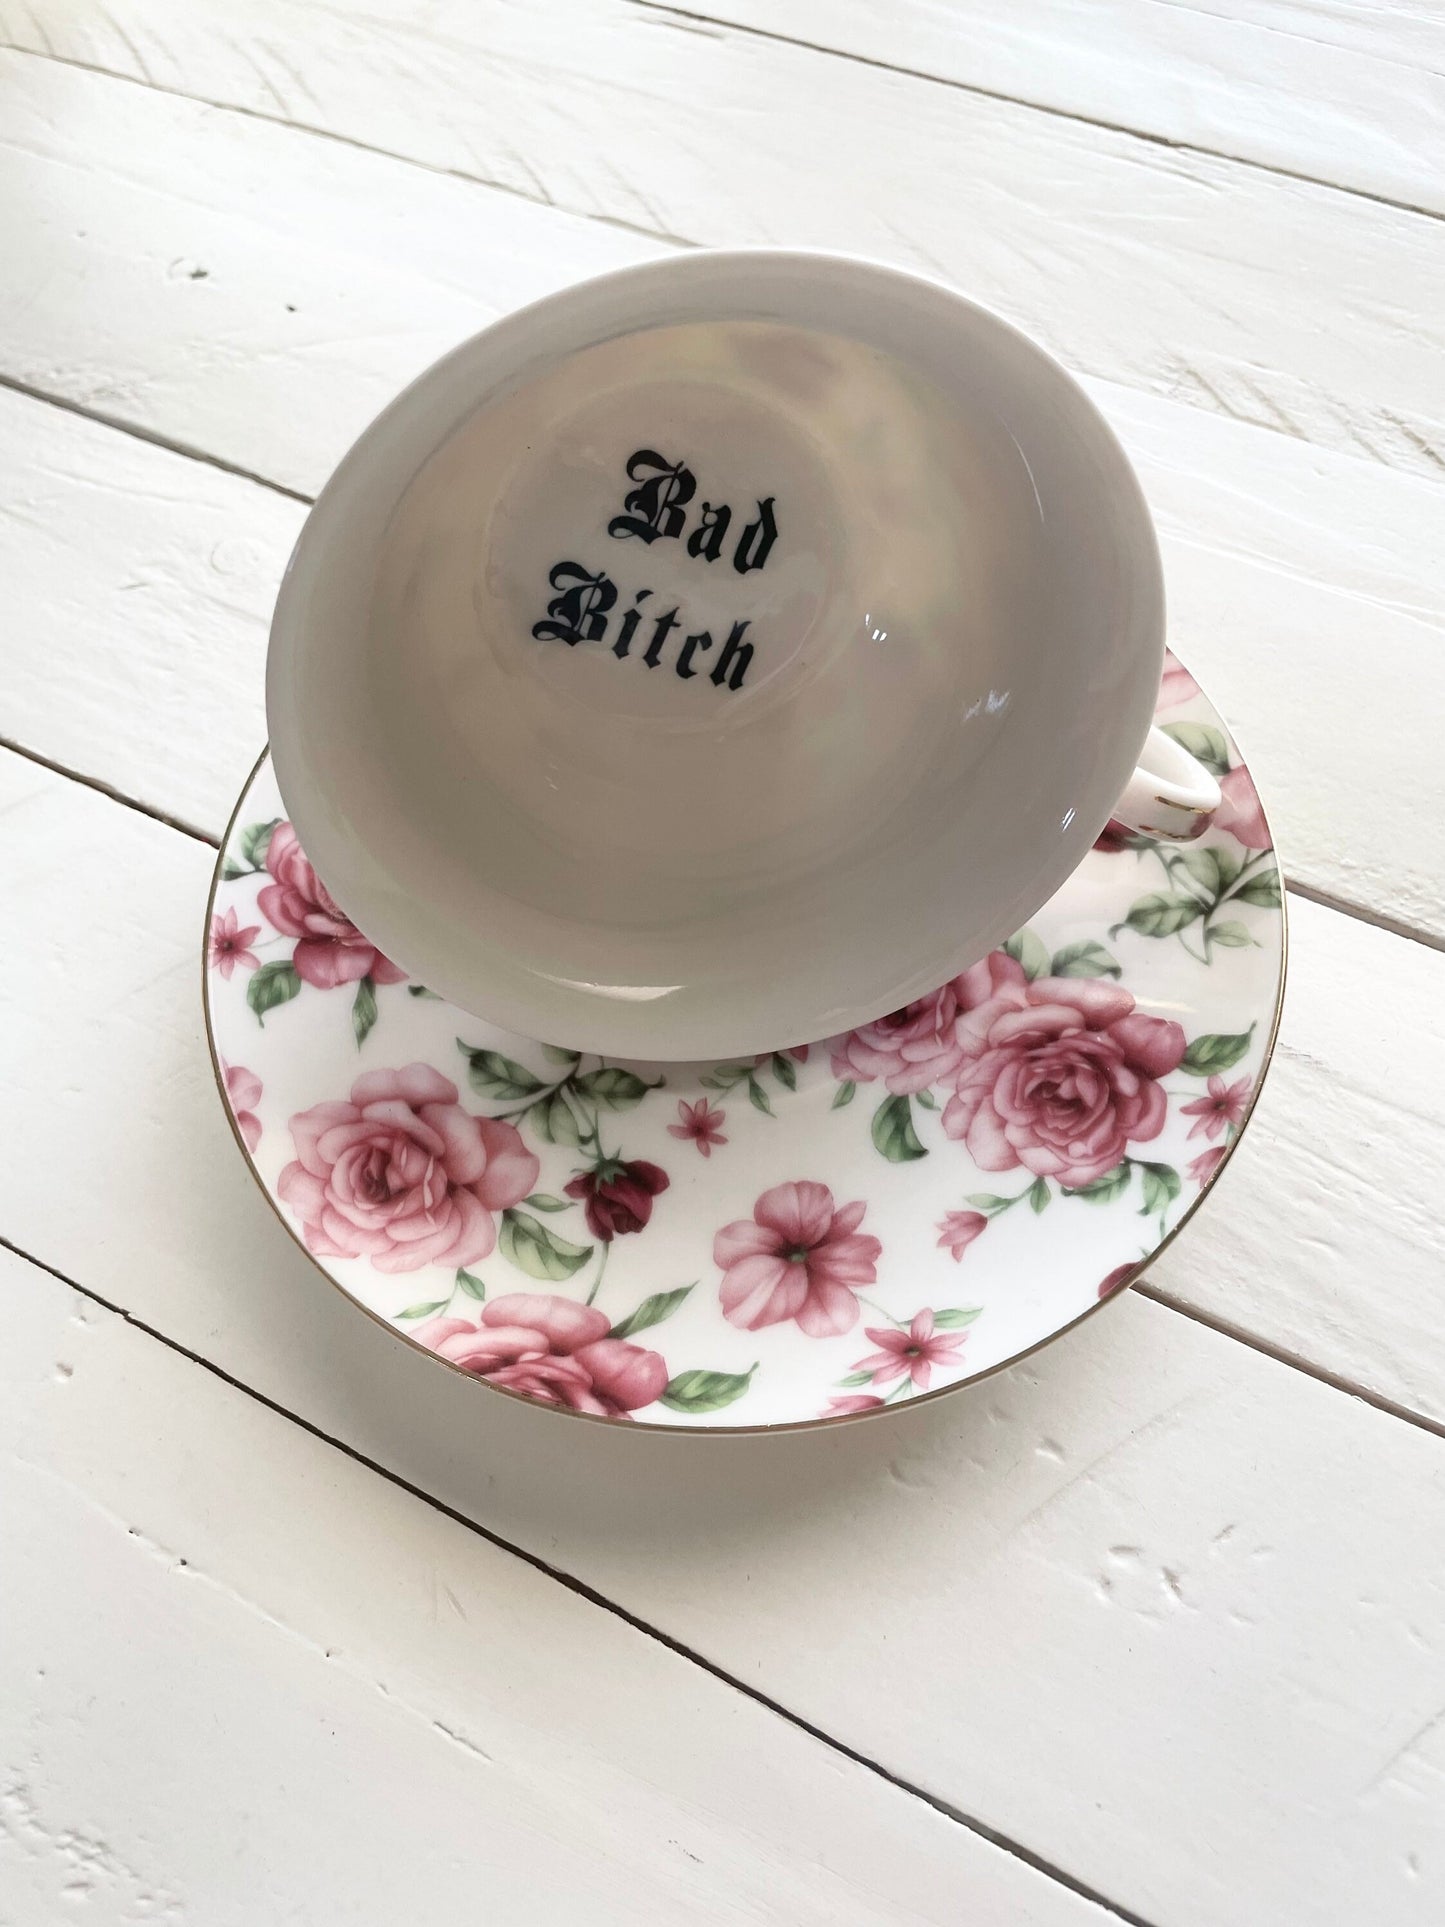 Bad Bitch, Tea cup and saucer, white and Pink Floral